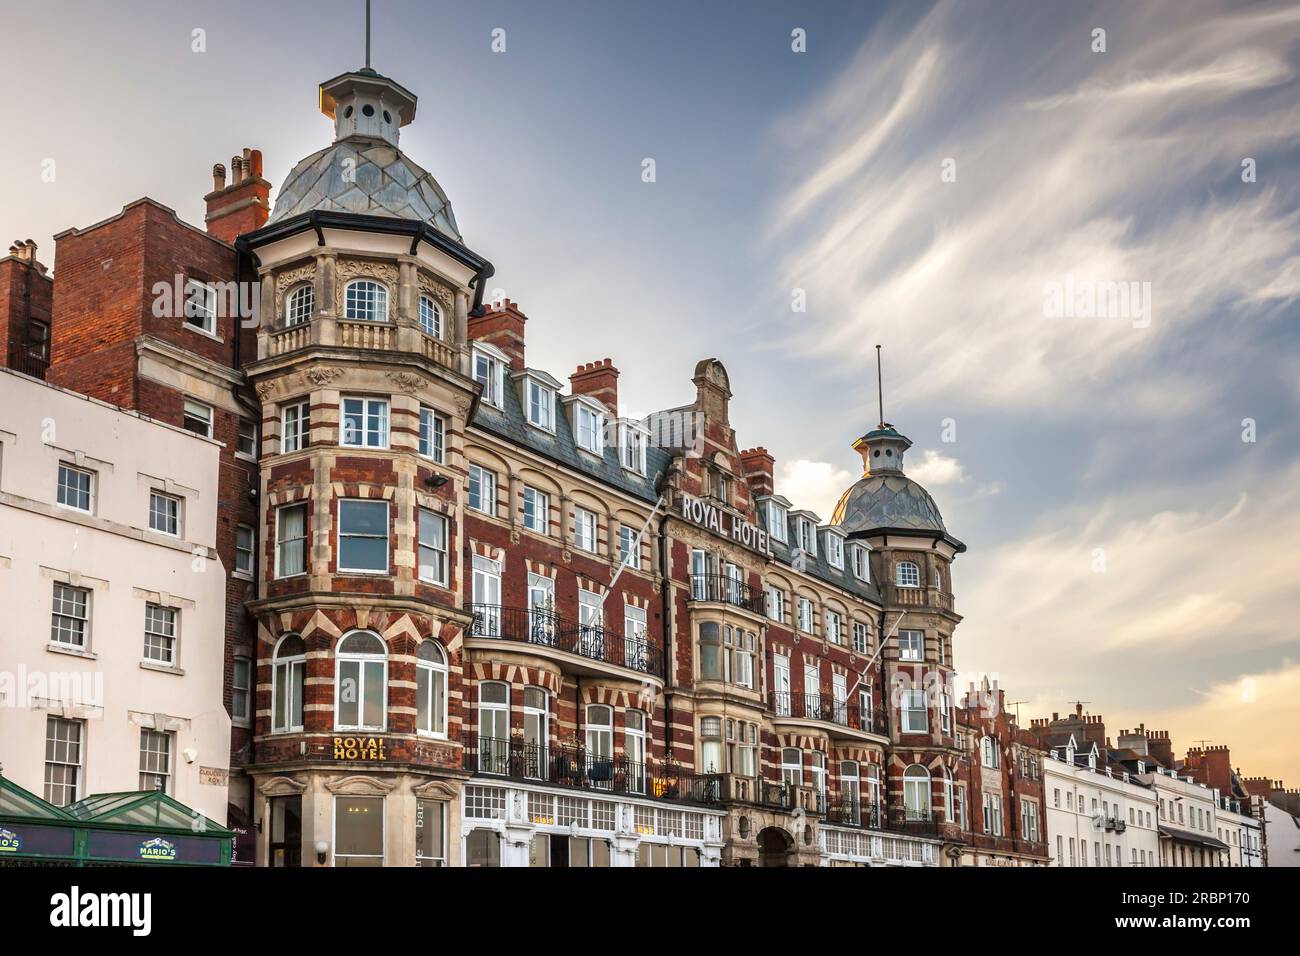 Historic hotel on the waterfront in Weymouth, Dorset, England Stock Photo